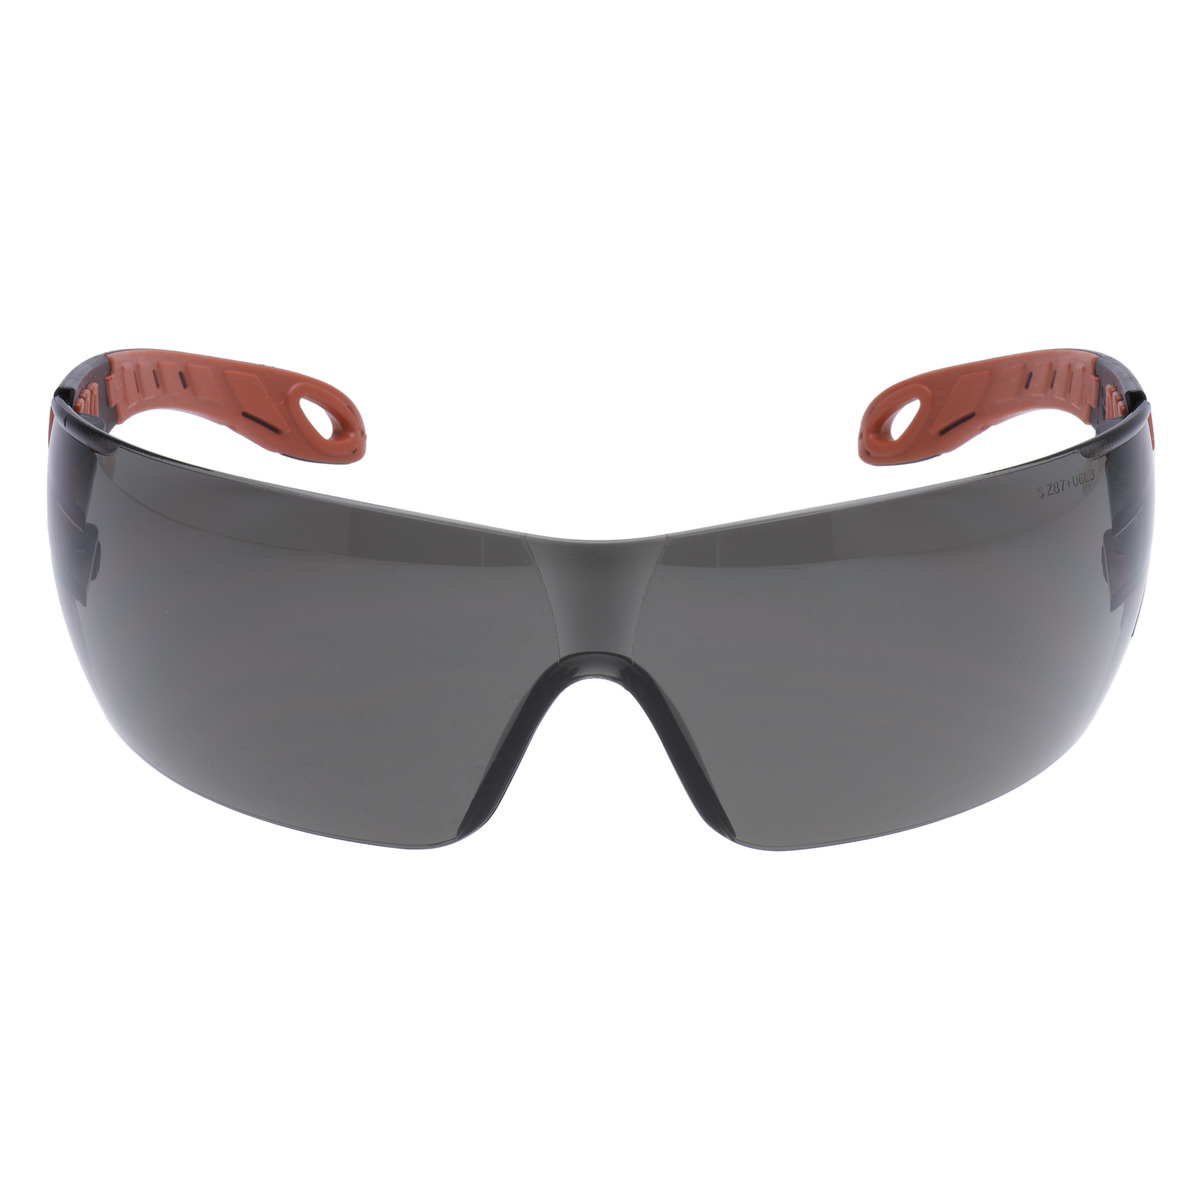 Impact-Resistant Soft Temple Polycarbonate Safety Glasses, Gray